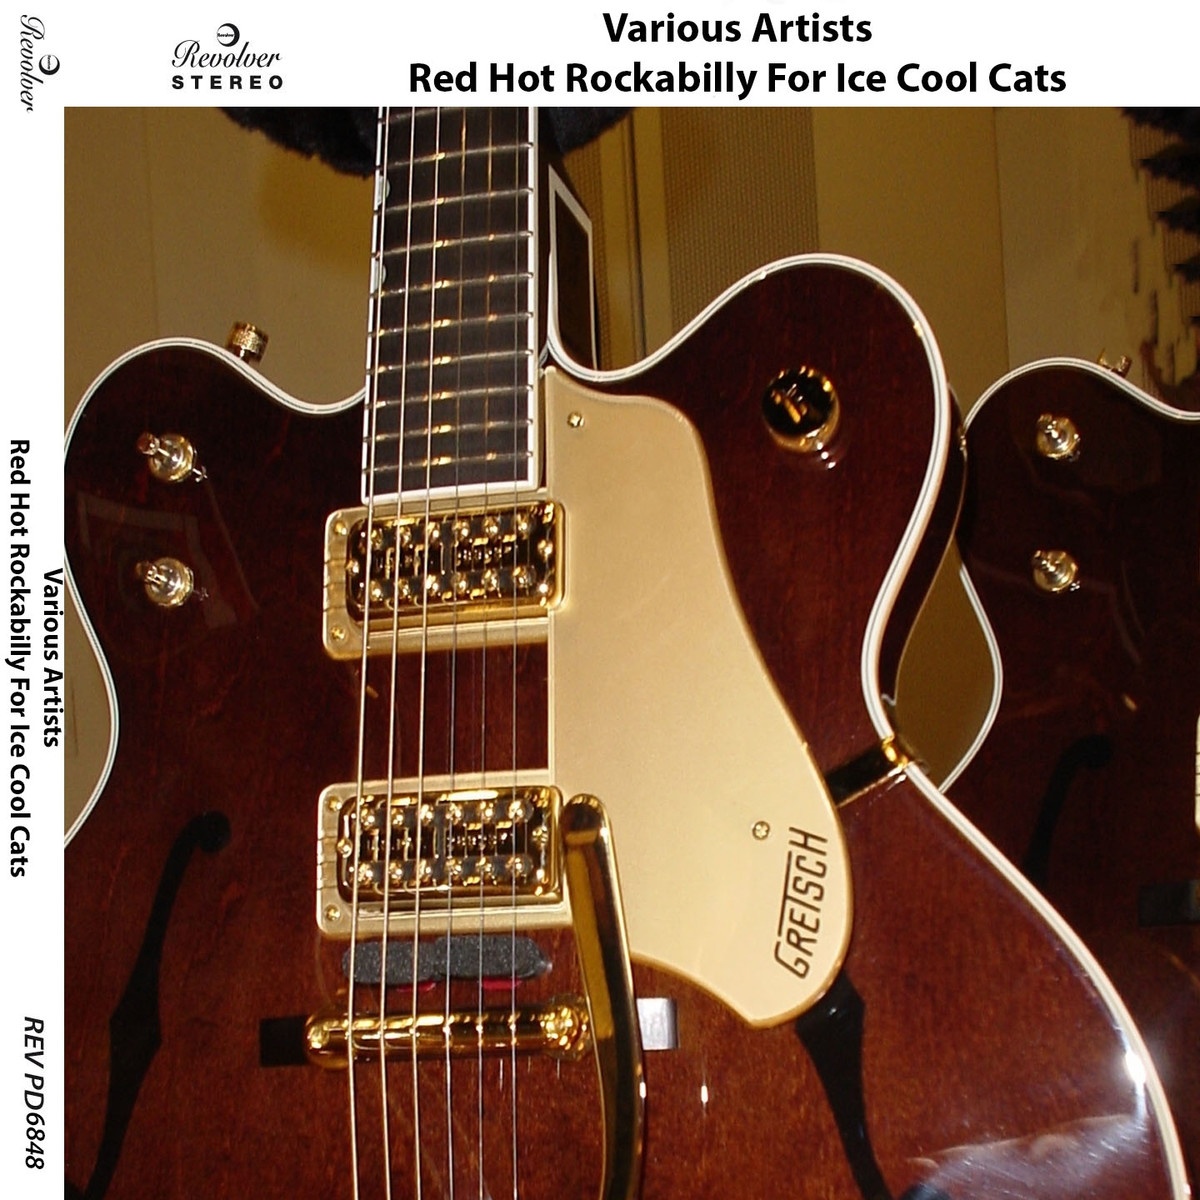 Red Hot Rockabilly for Ice Cool Cats